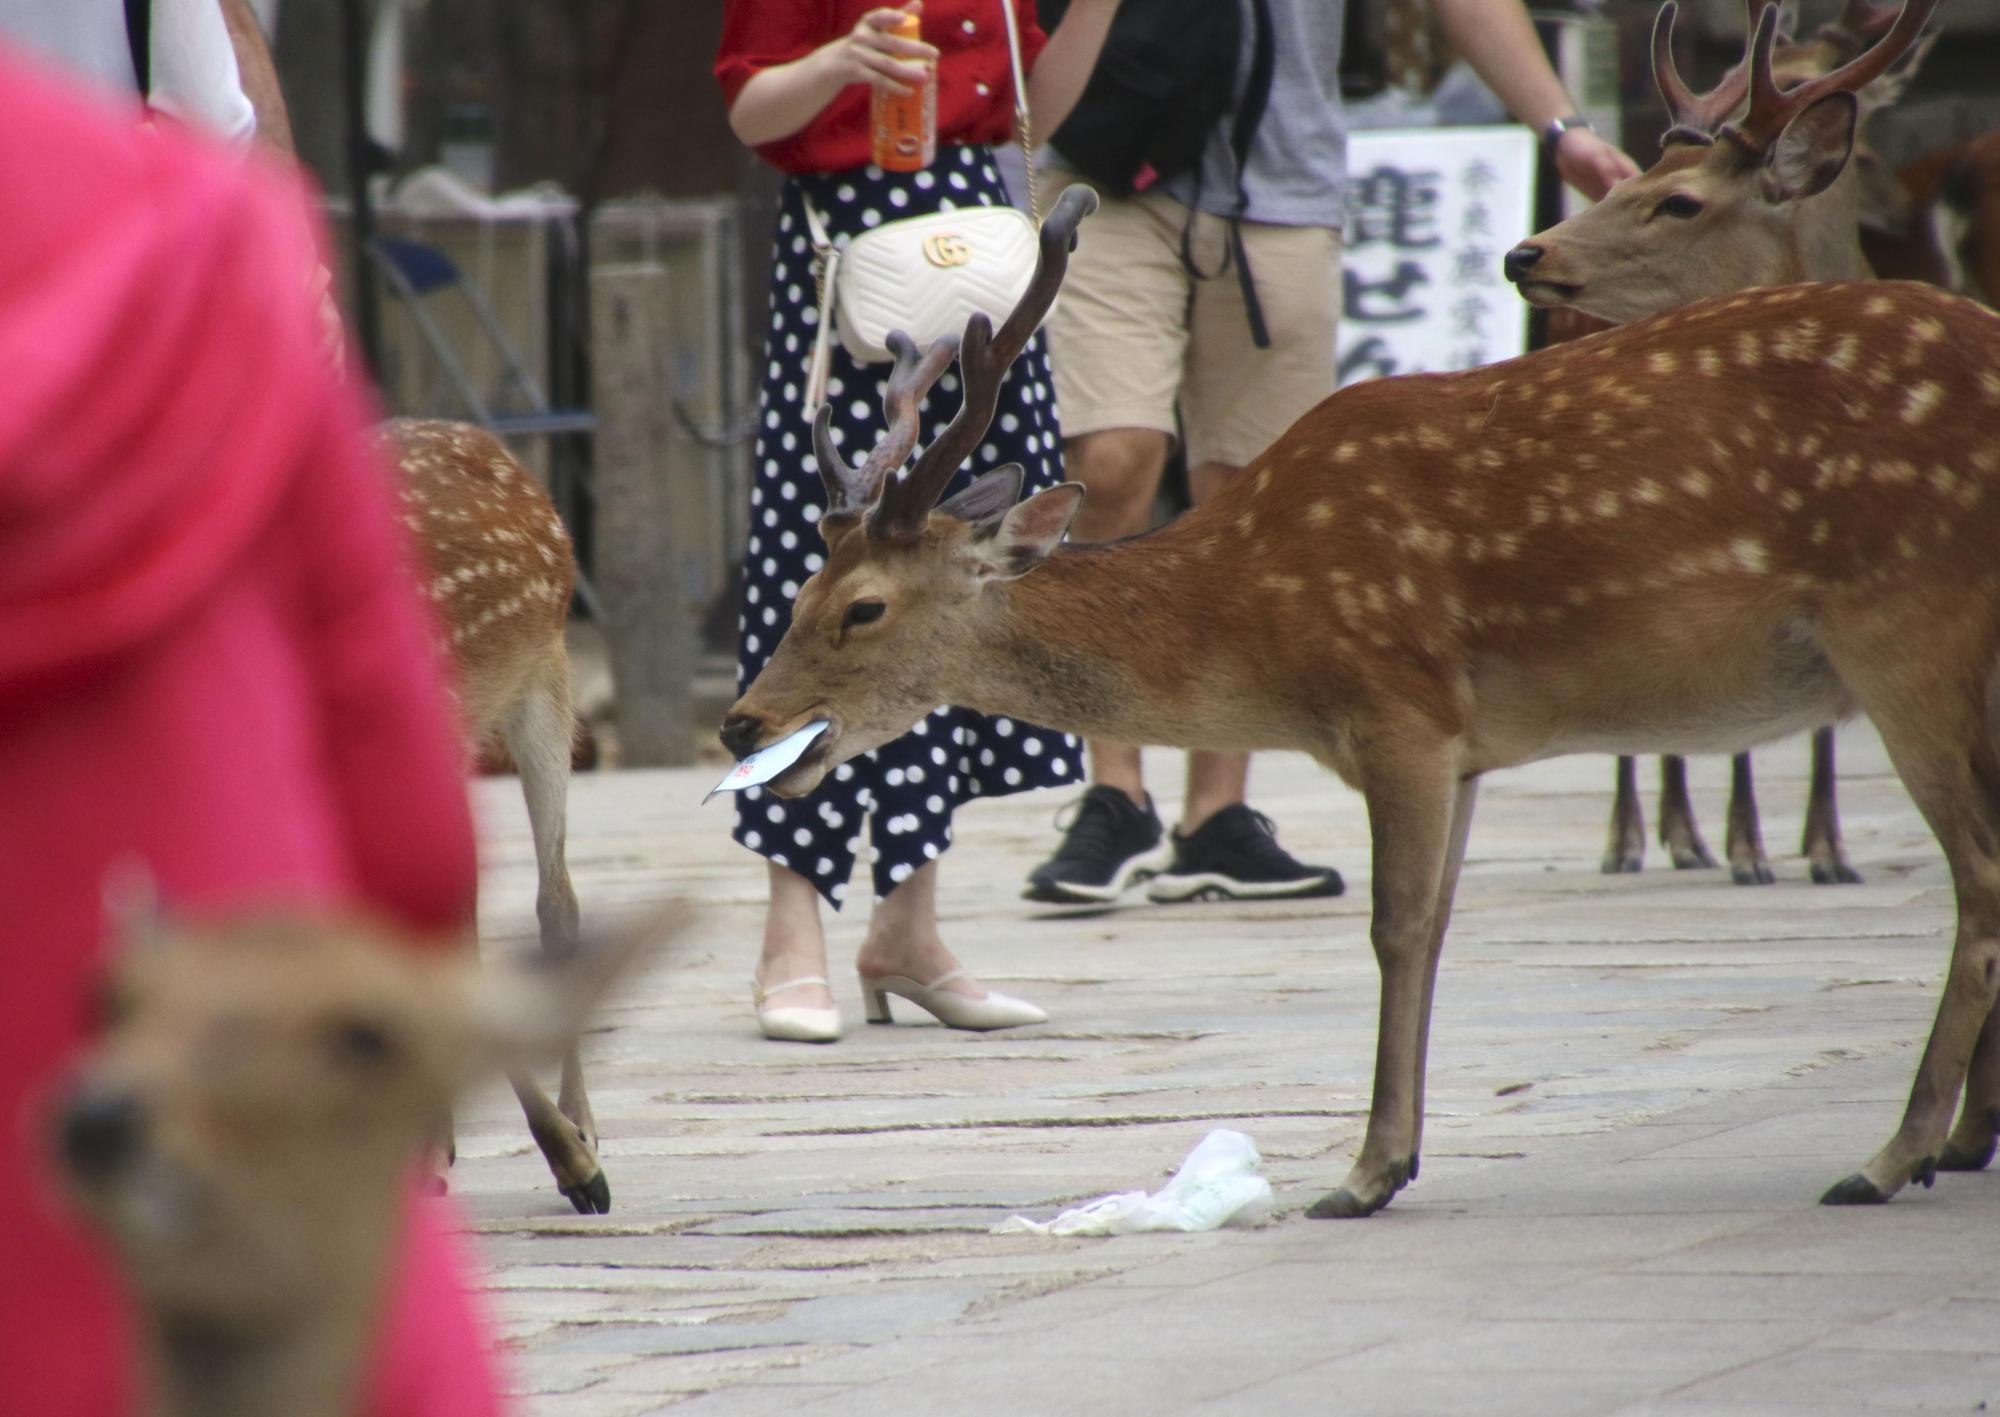 A deer picks up garbage from the ground last month in Nara Park in the city of Nara. Numerous plastic bags were found in the stomachs of more than half of the 14 wild deer that have recently died in the park. | KYODO